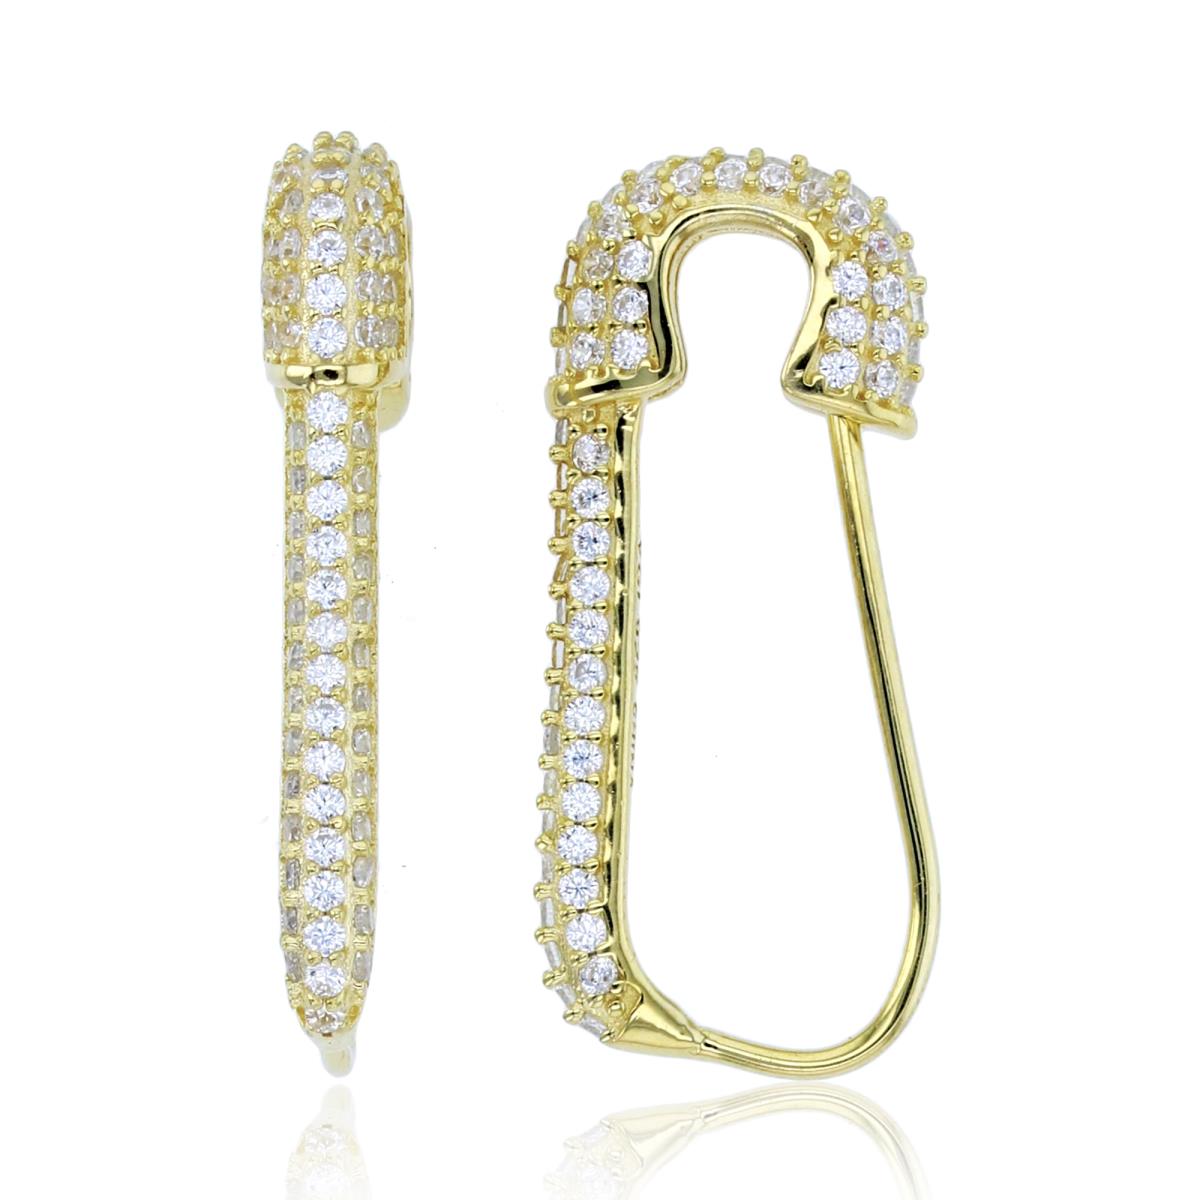 Sterling Silver+1Micron Yellow Gold Rnd White CZ "Safety Pin" Pave Earrings